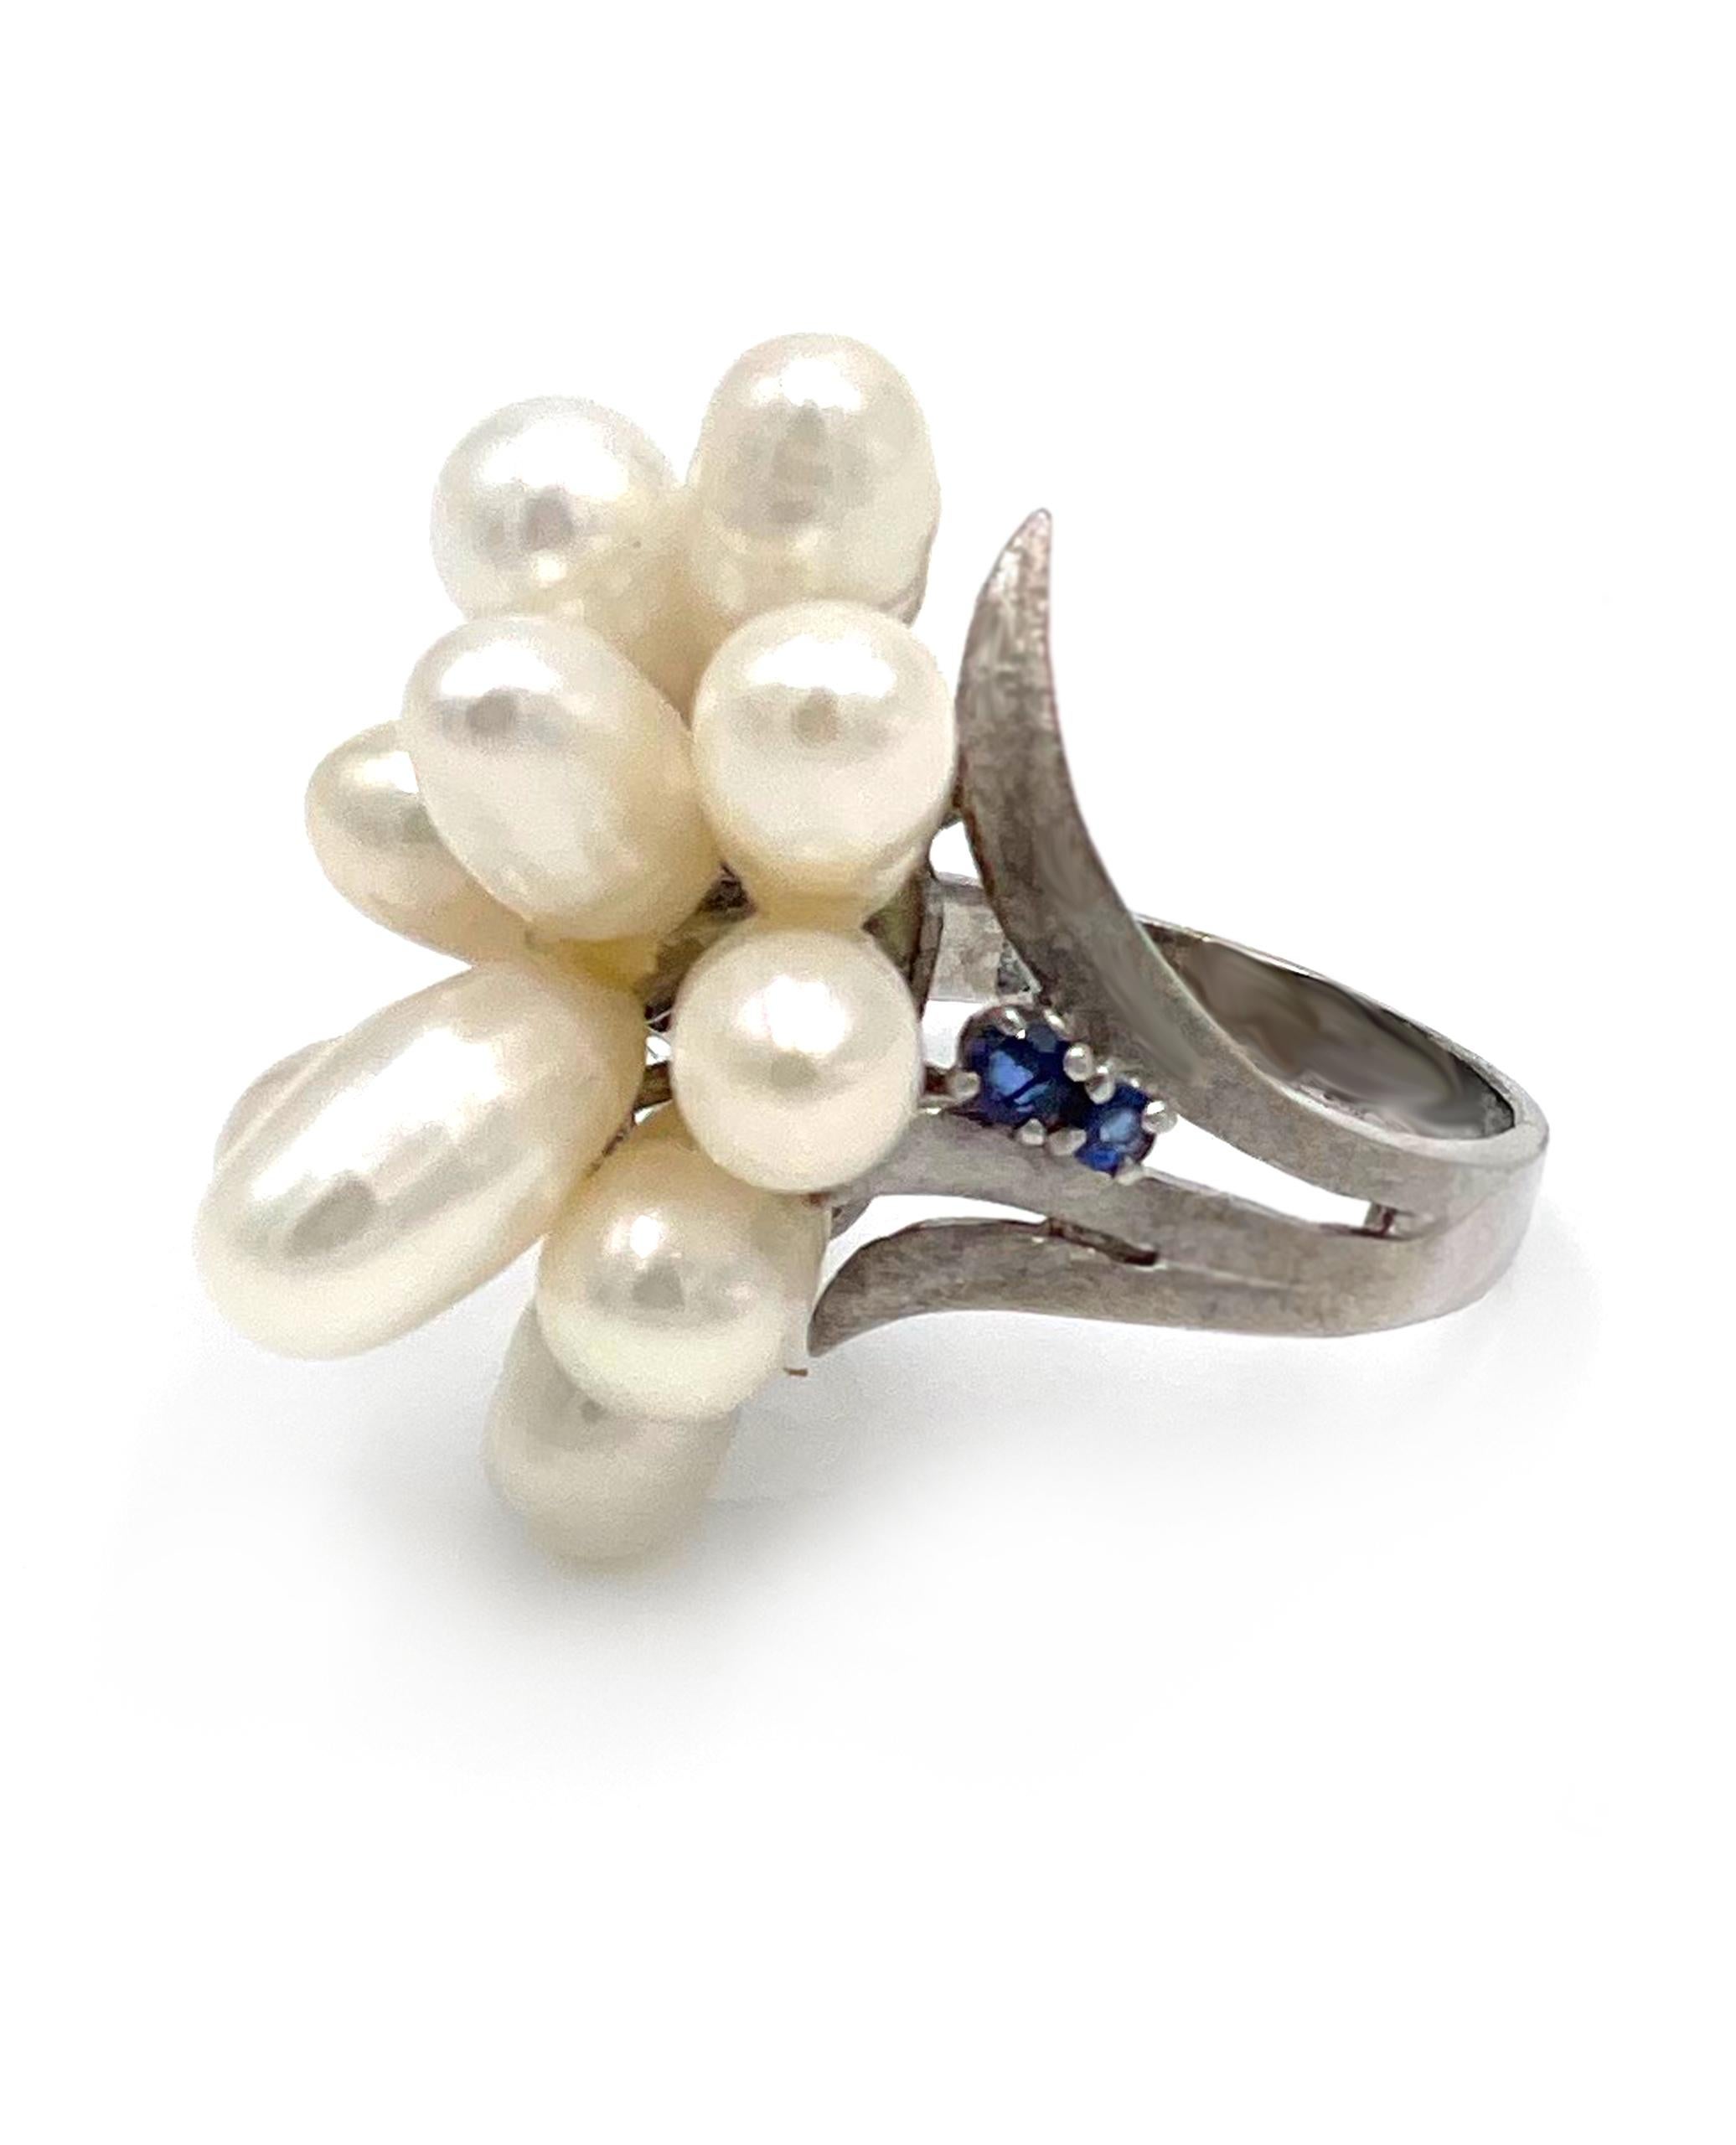 Preowned 14K white gold fresh water pearl and sapphire cocktail ring. The setting is peg set with half drilled oblong
fresh water pearls ranging from 10.0x5.6mm to 6.0x5.0mm. The ring is accented with four round faceted
deep blue sapphires averaging